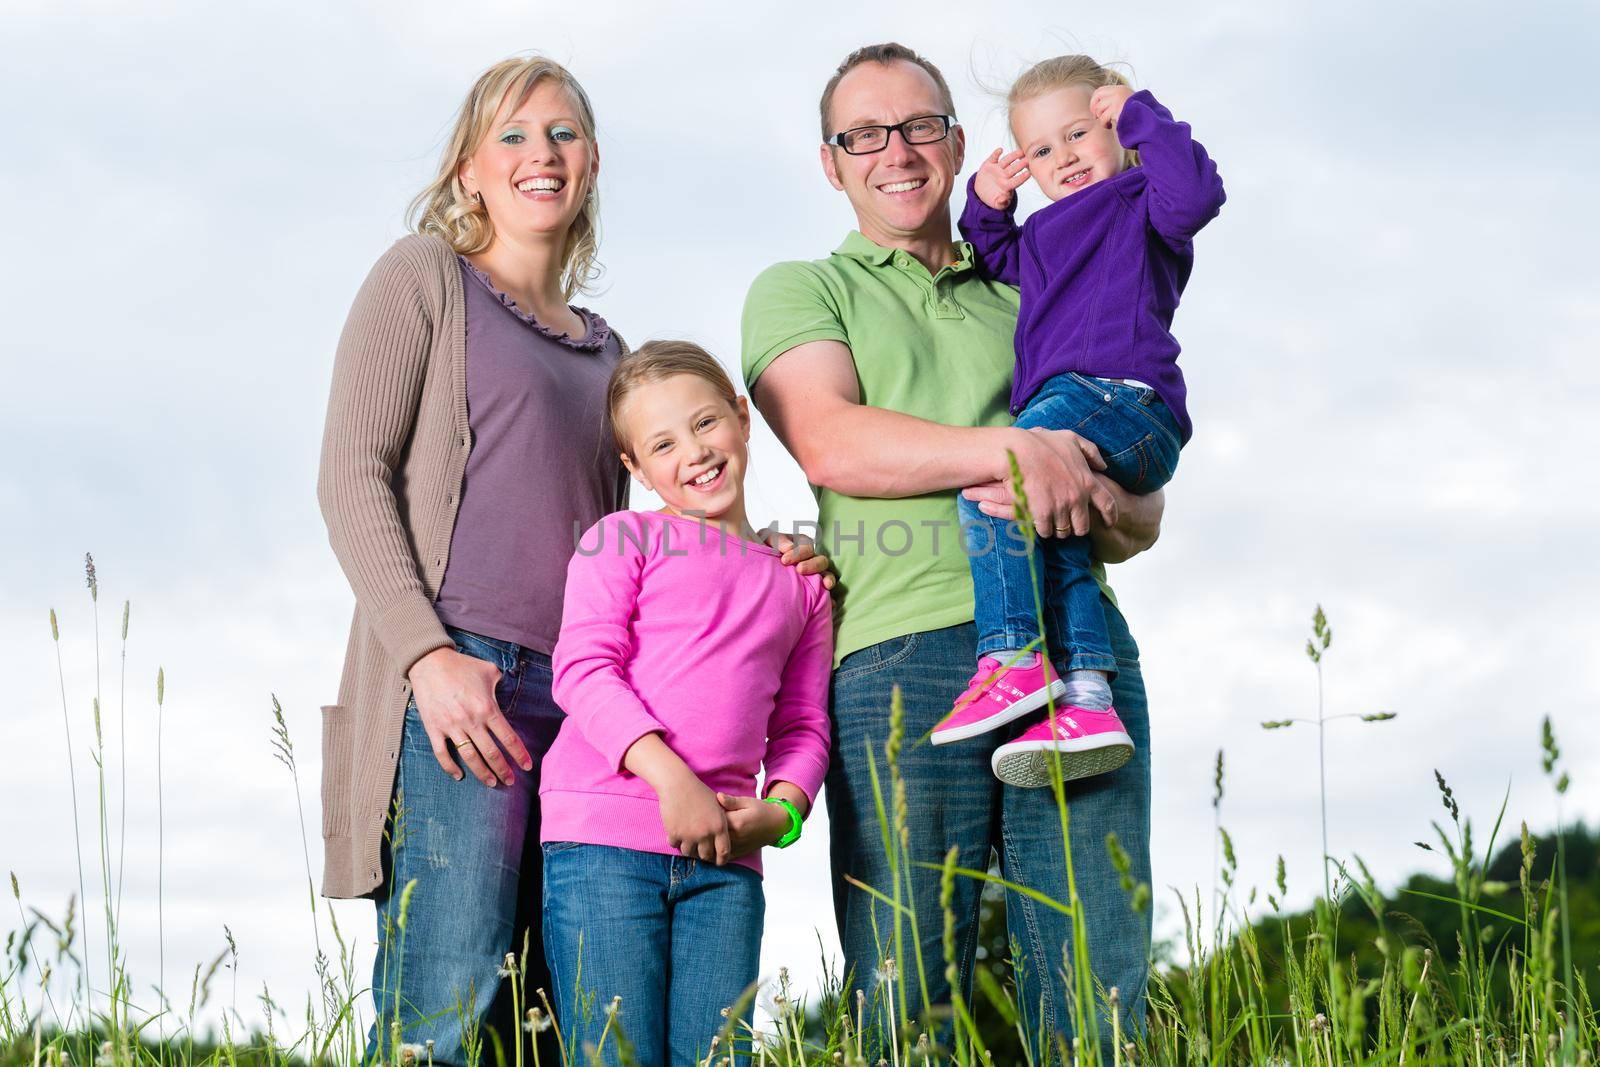 Family outdoors standing on grass by Kzenon